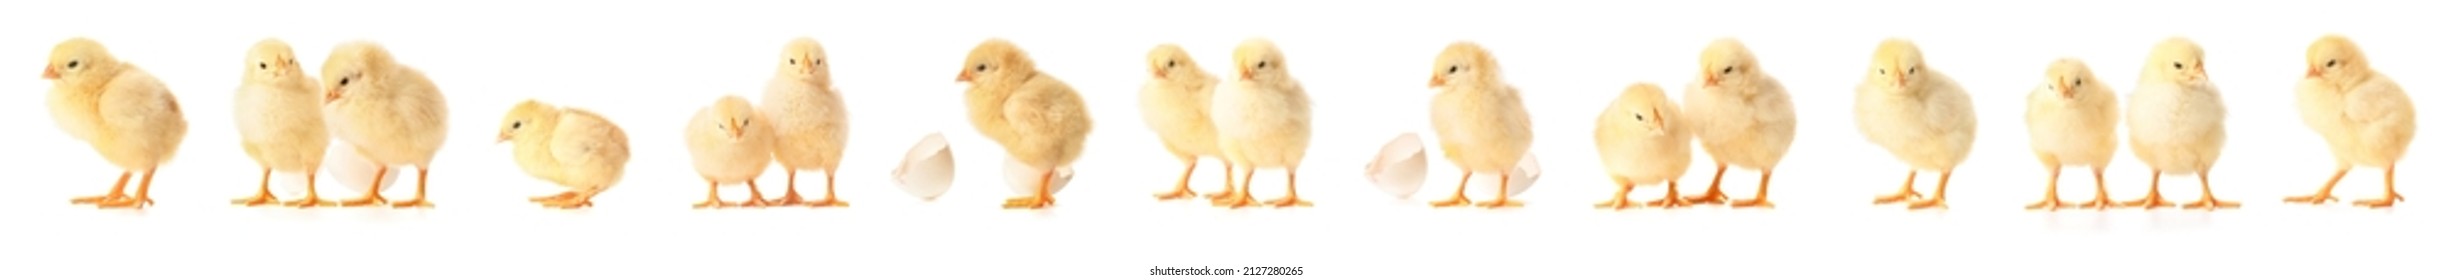 Many cute chicks on white background